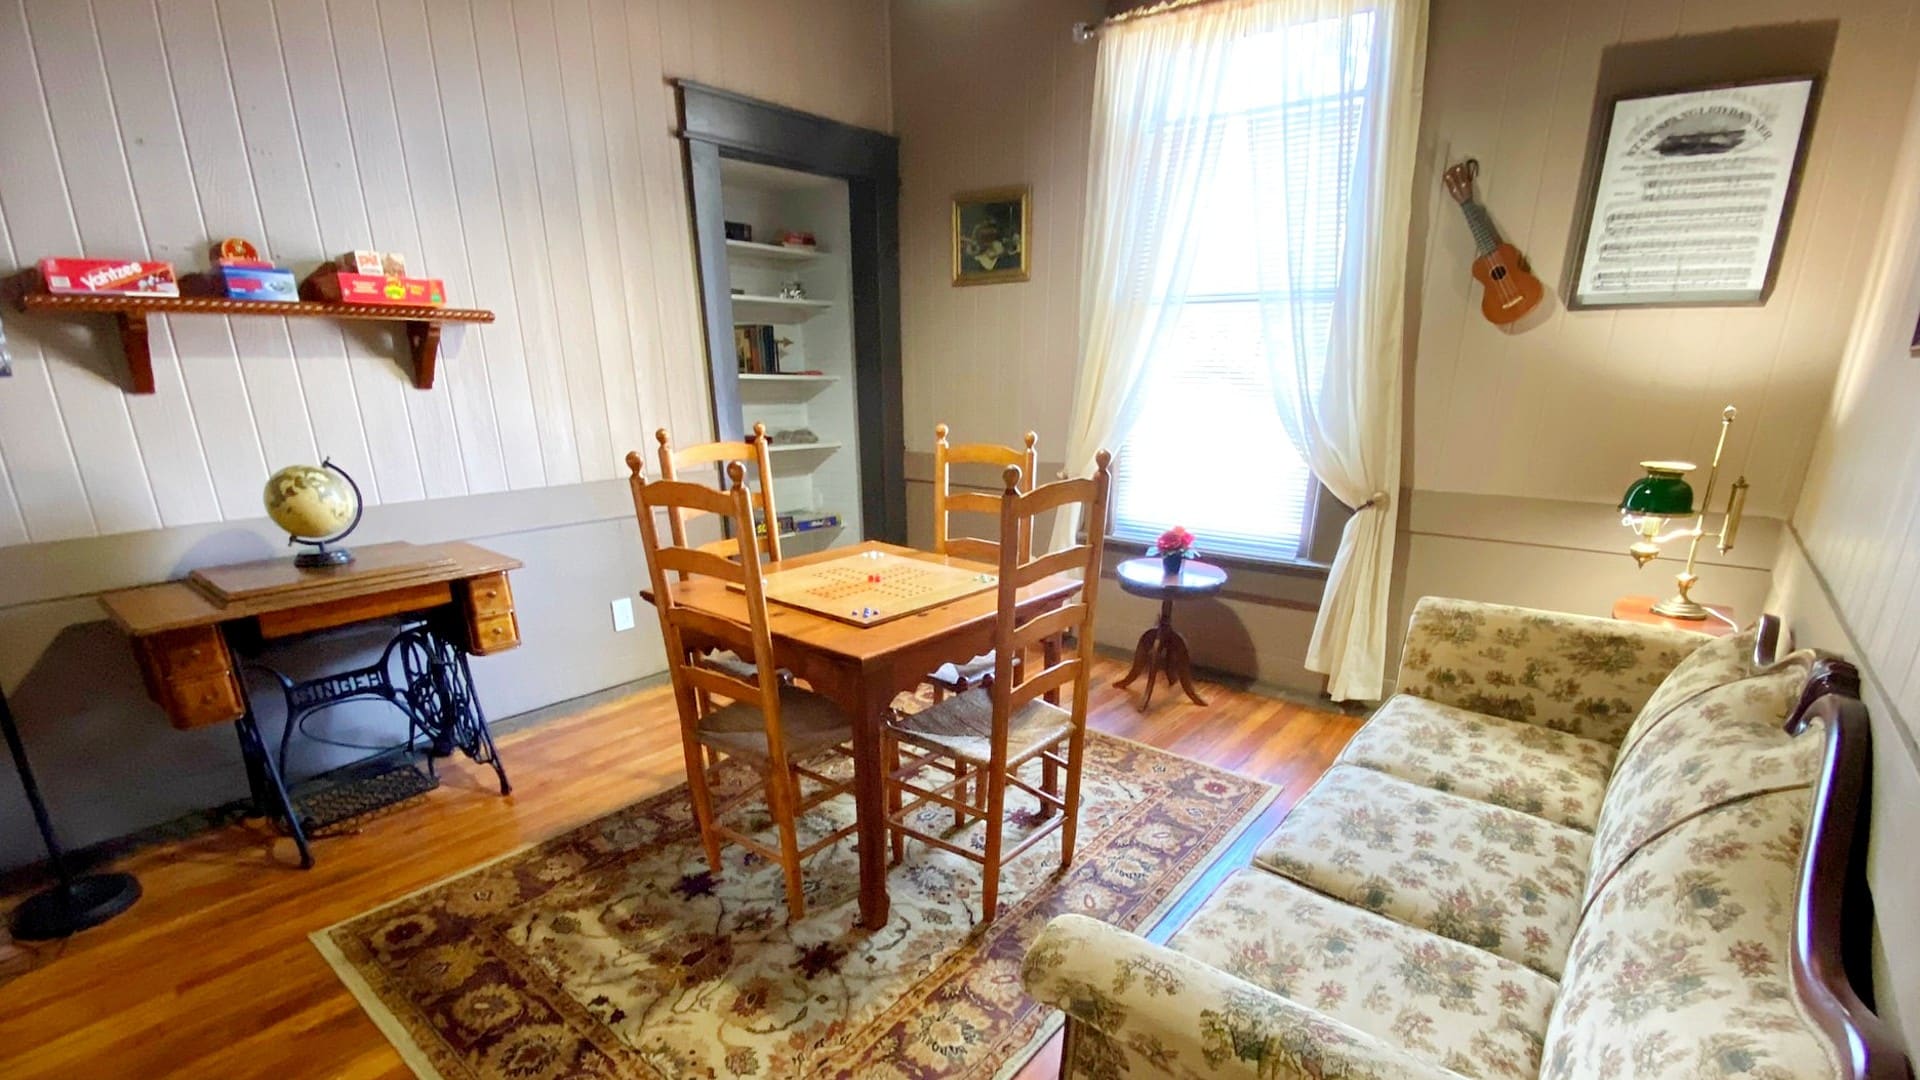 A small room with couch, table with four chairs, built in shelving, antique sewing table and large window